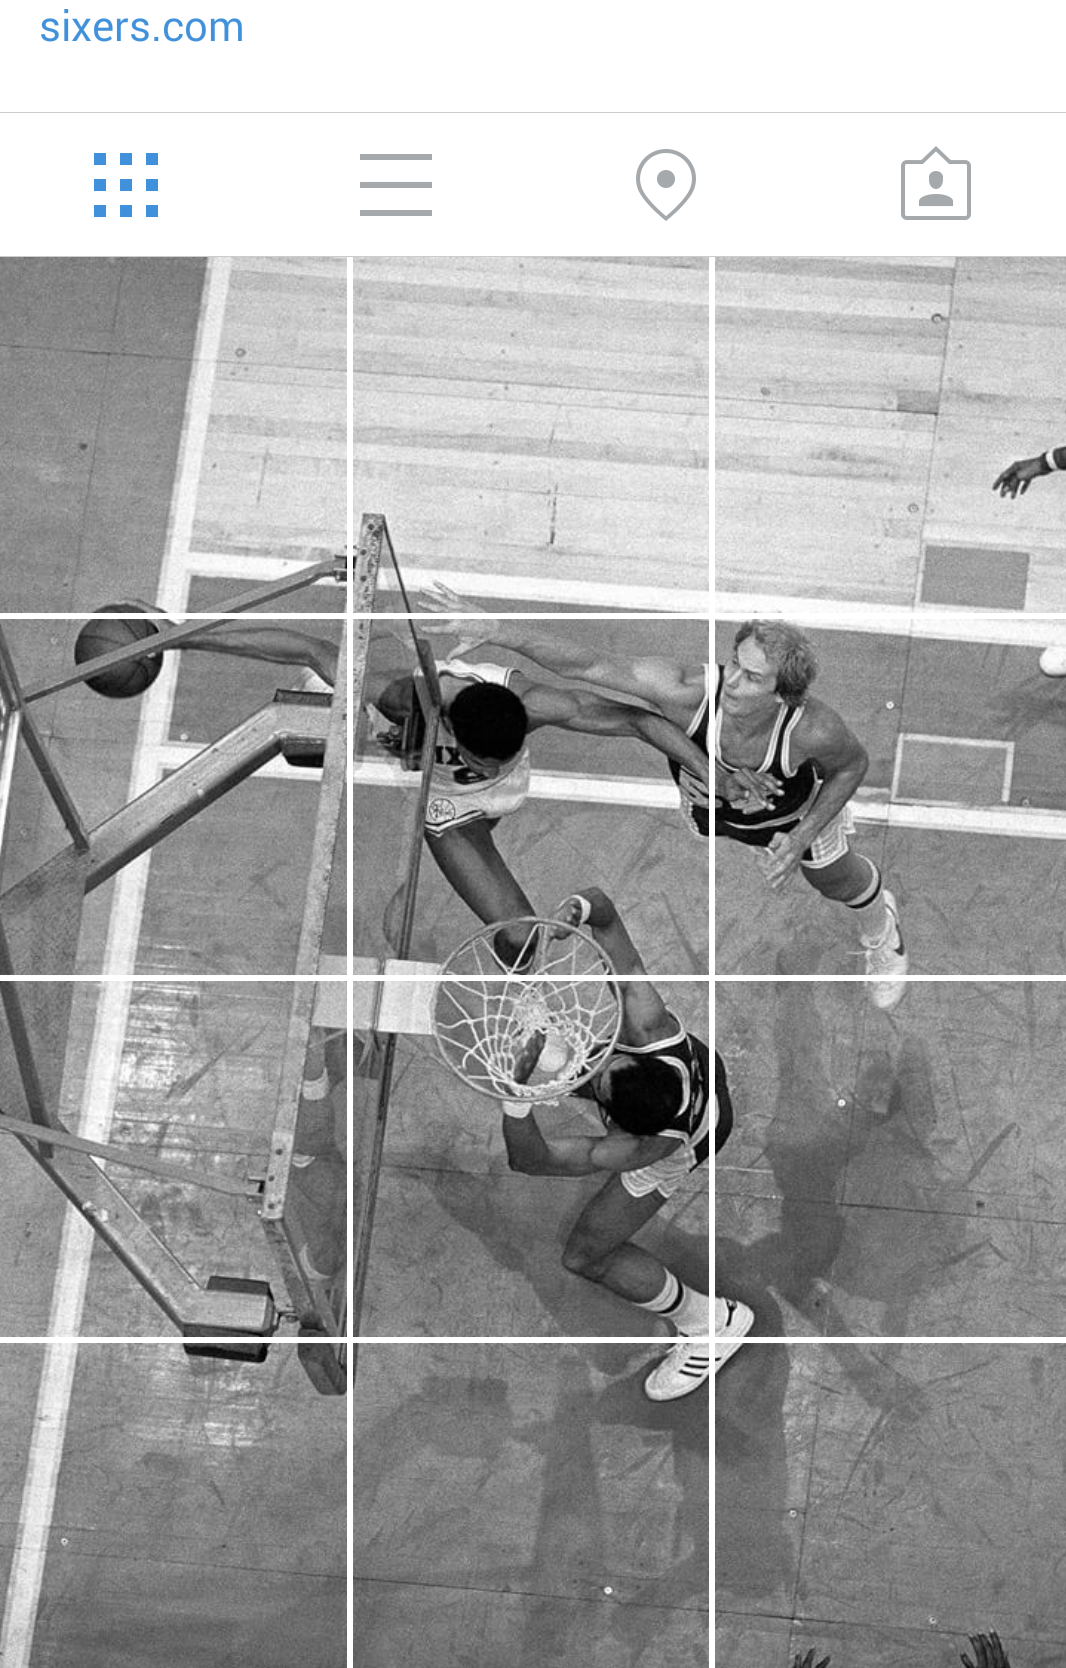 A look at the Sixers Instagram posts used to honor the 35th anniversary of Julius Erving's amazing shot against the Lakers. (credit: Sixers Instagram)